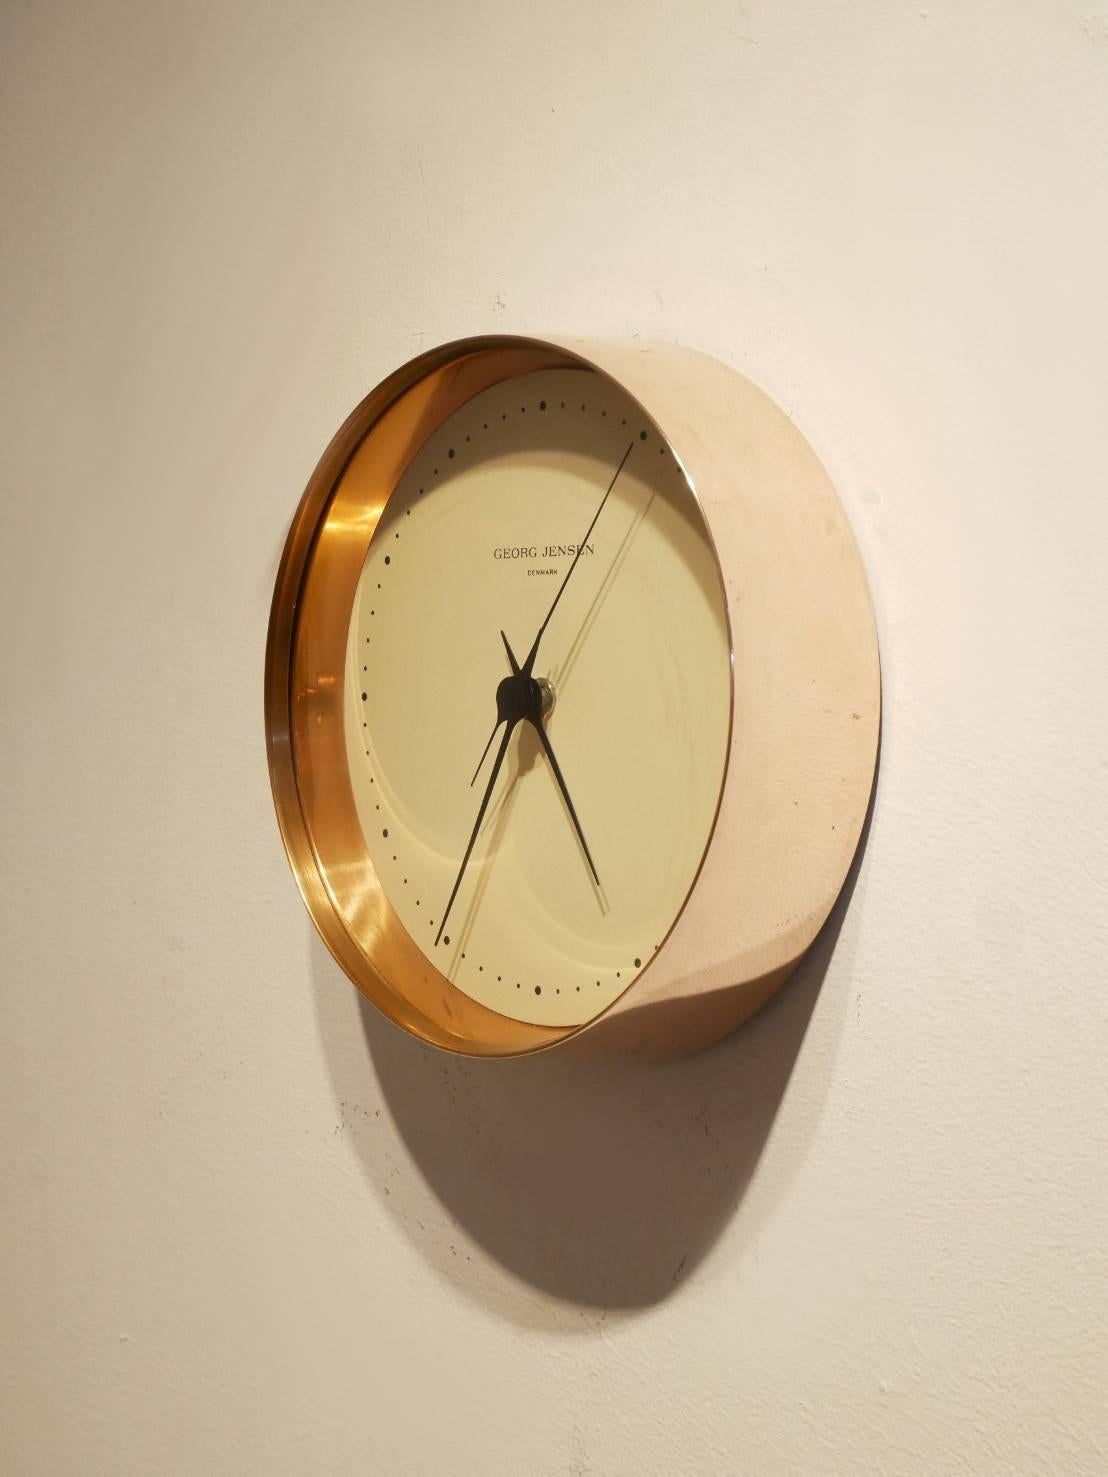 Rare copper rimmed clock from famed modernist silver designer Henning Koppel for Goerg Jensen. This 1st edition copper version of this clock has been out of production for decades.